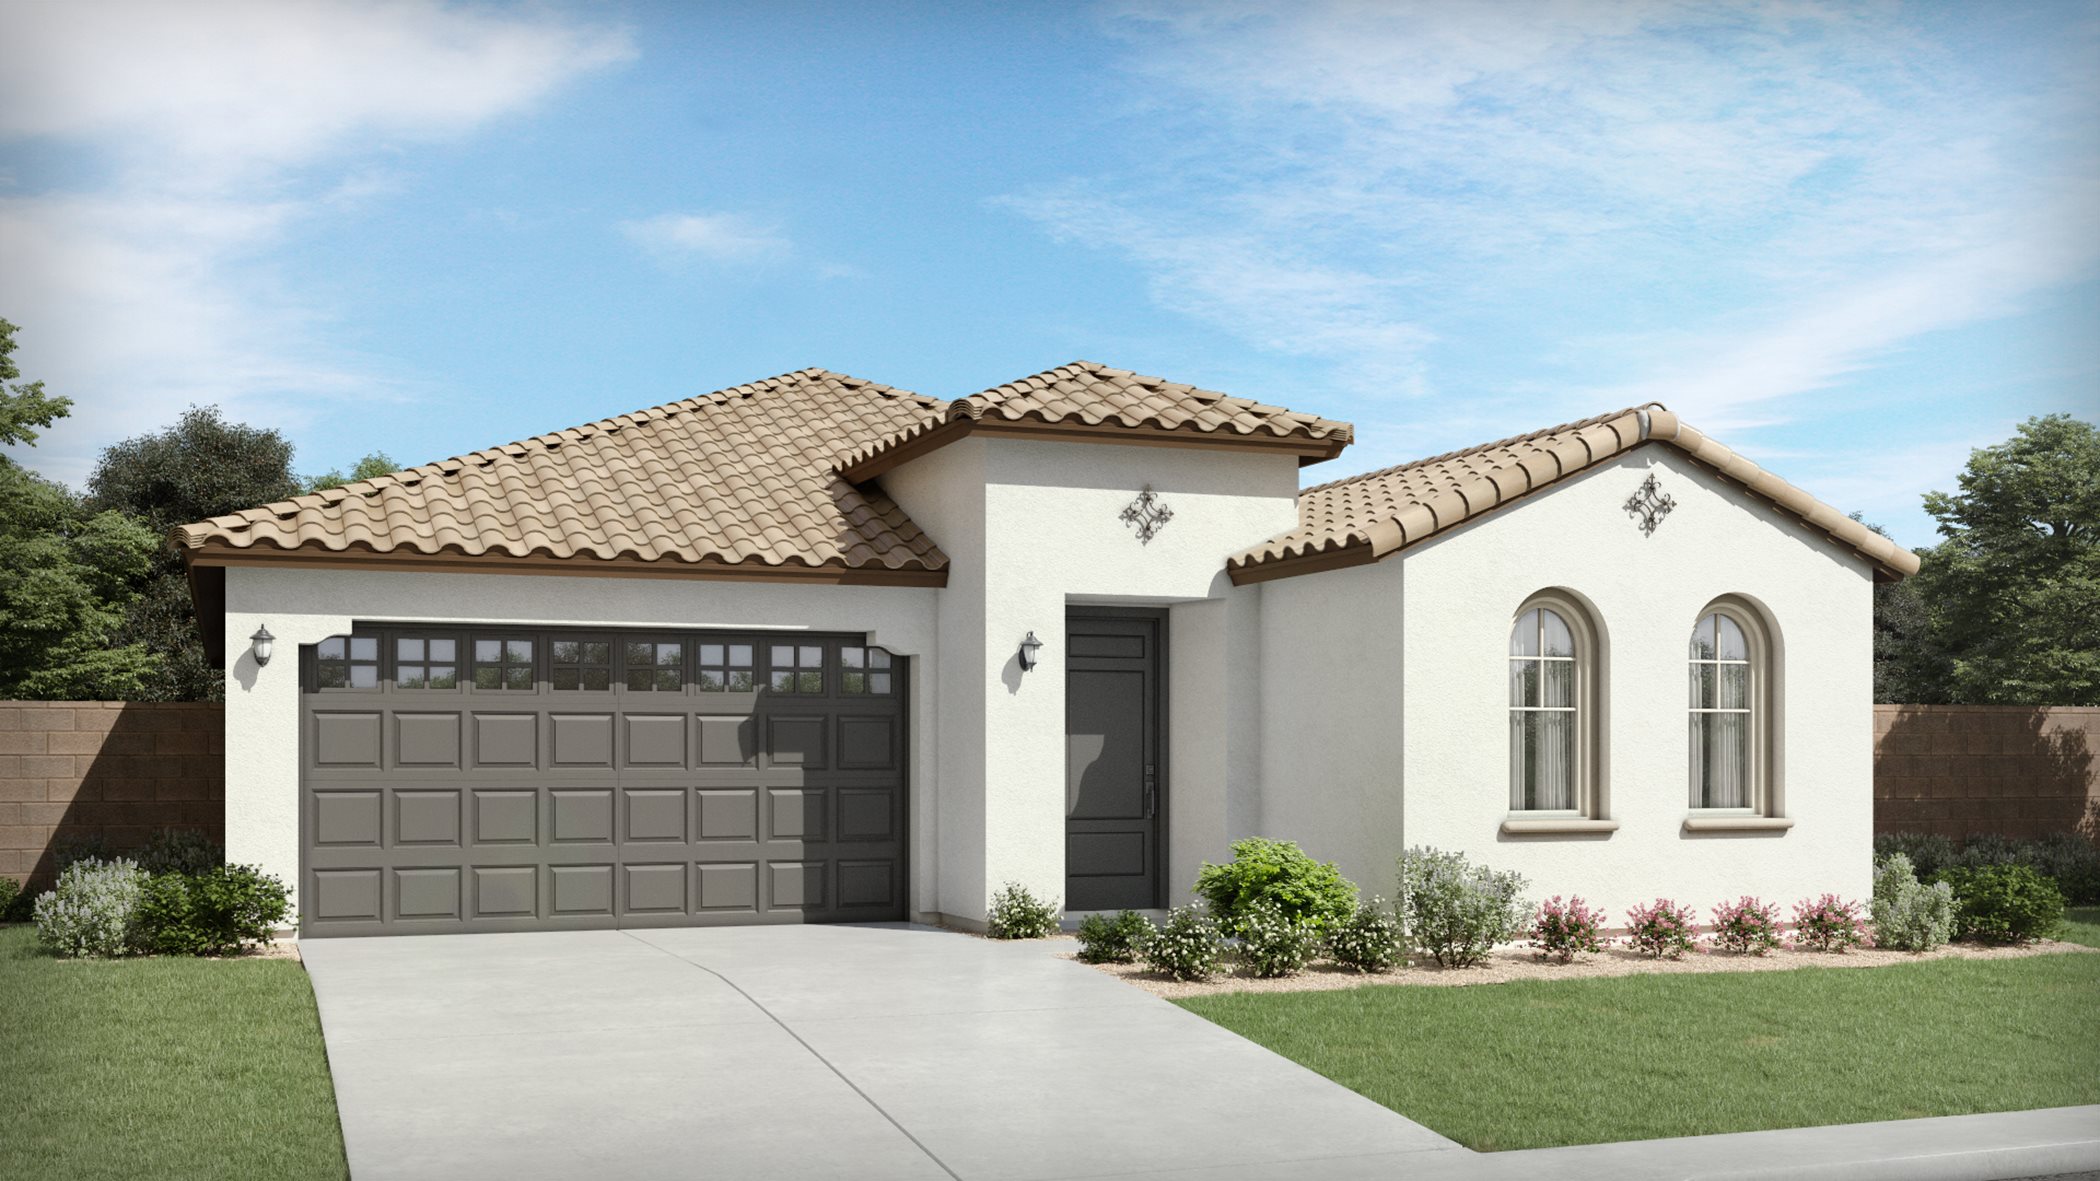 Sage Plan 4022 A Spanish Colonial